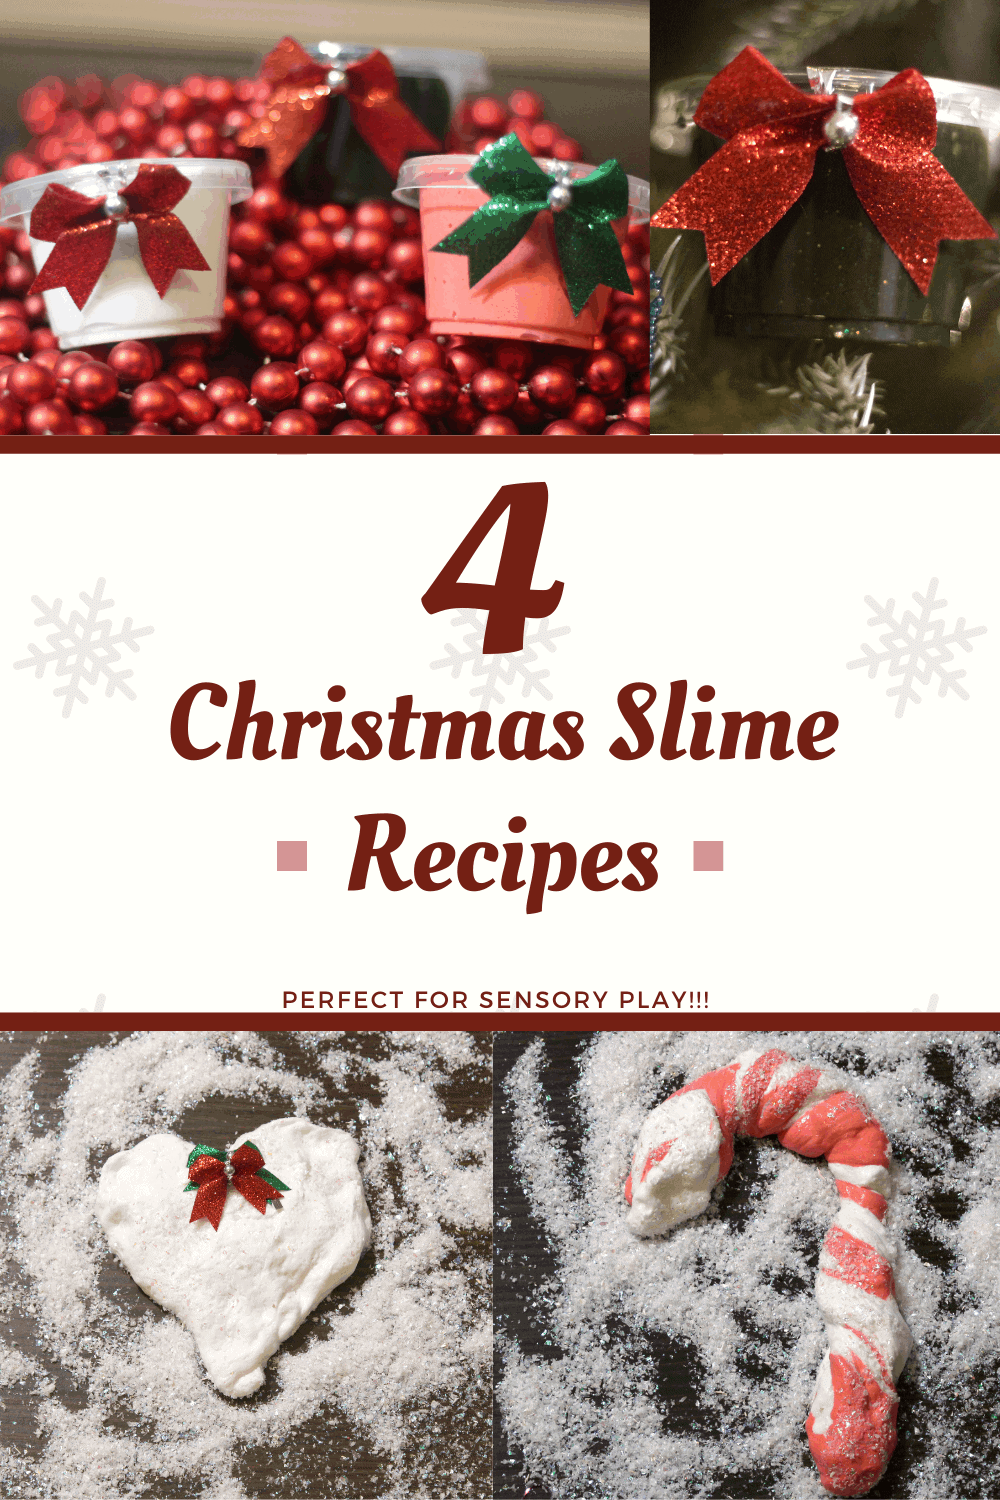 Christmas Slime Recipes perfect for making Christmas gifts, sensory play, & stem project for kids. Sensory Christmas Slime Recipe!